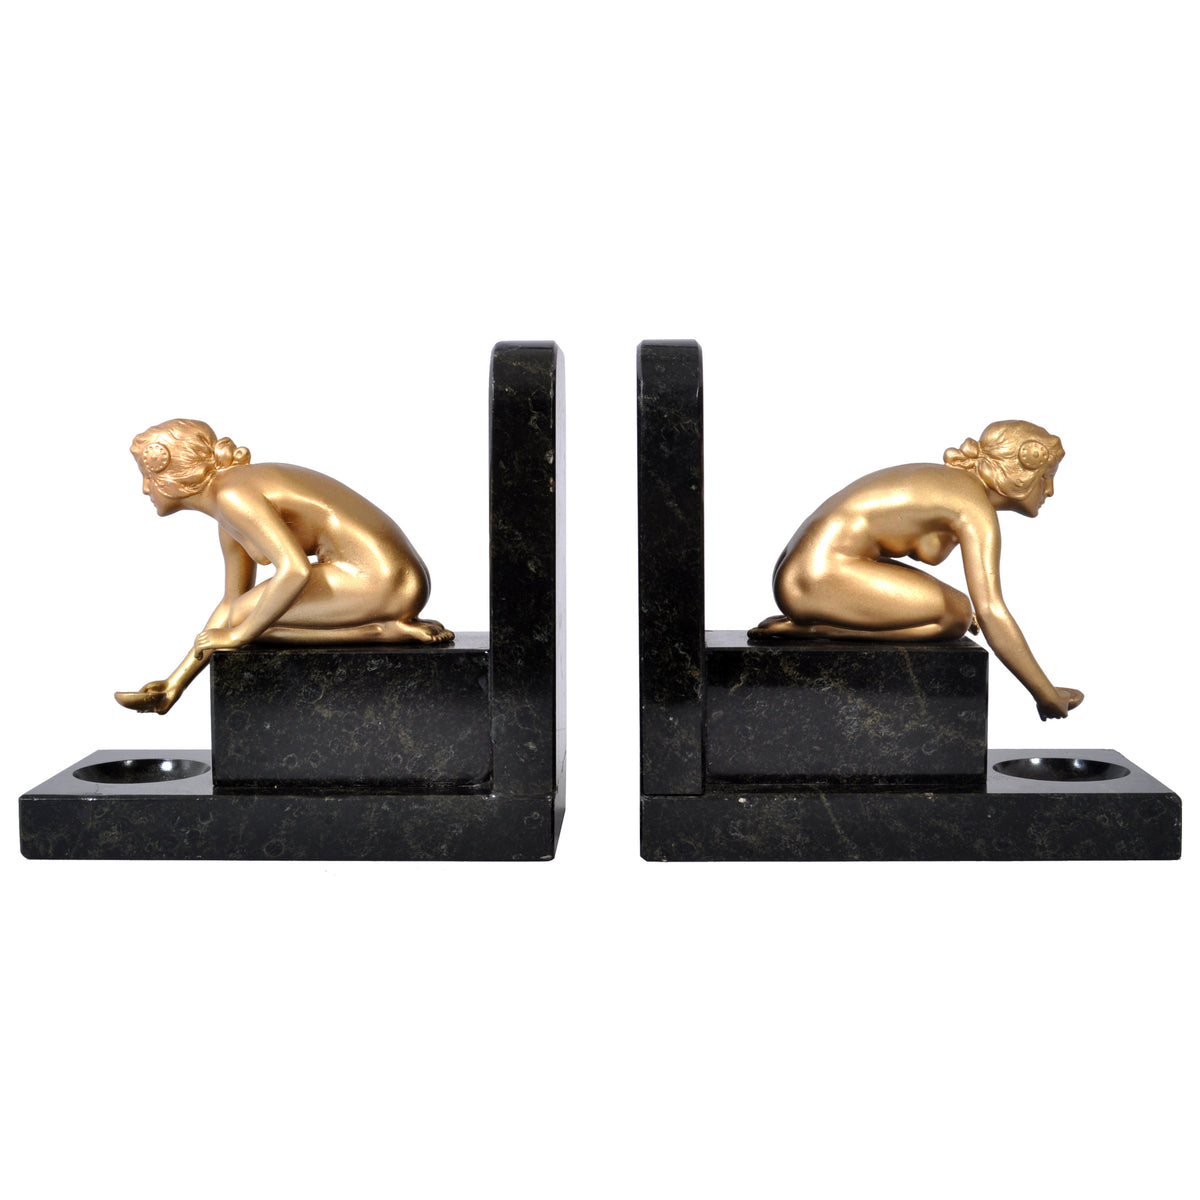 Pair of Antique Art Deco Gilded Bronze & Marble Female Nude Statue Bookends, 1920s